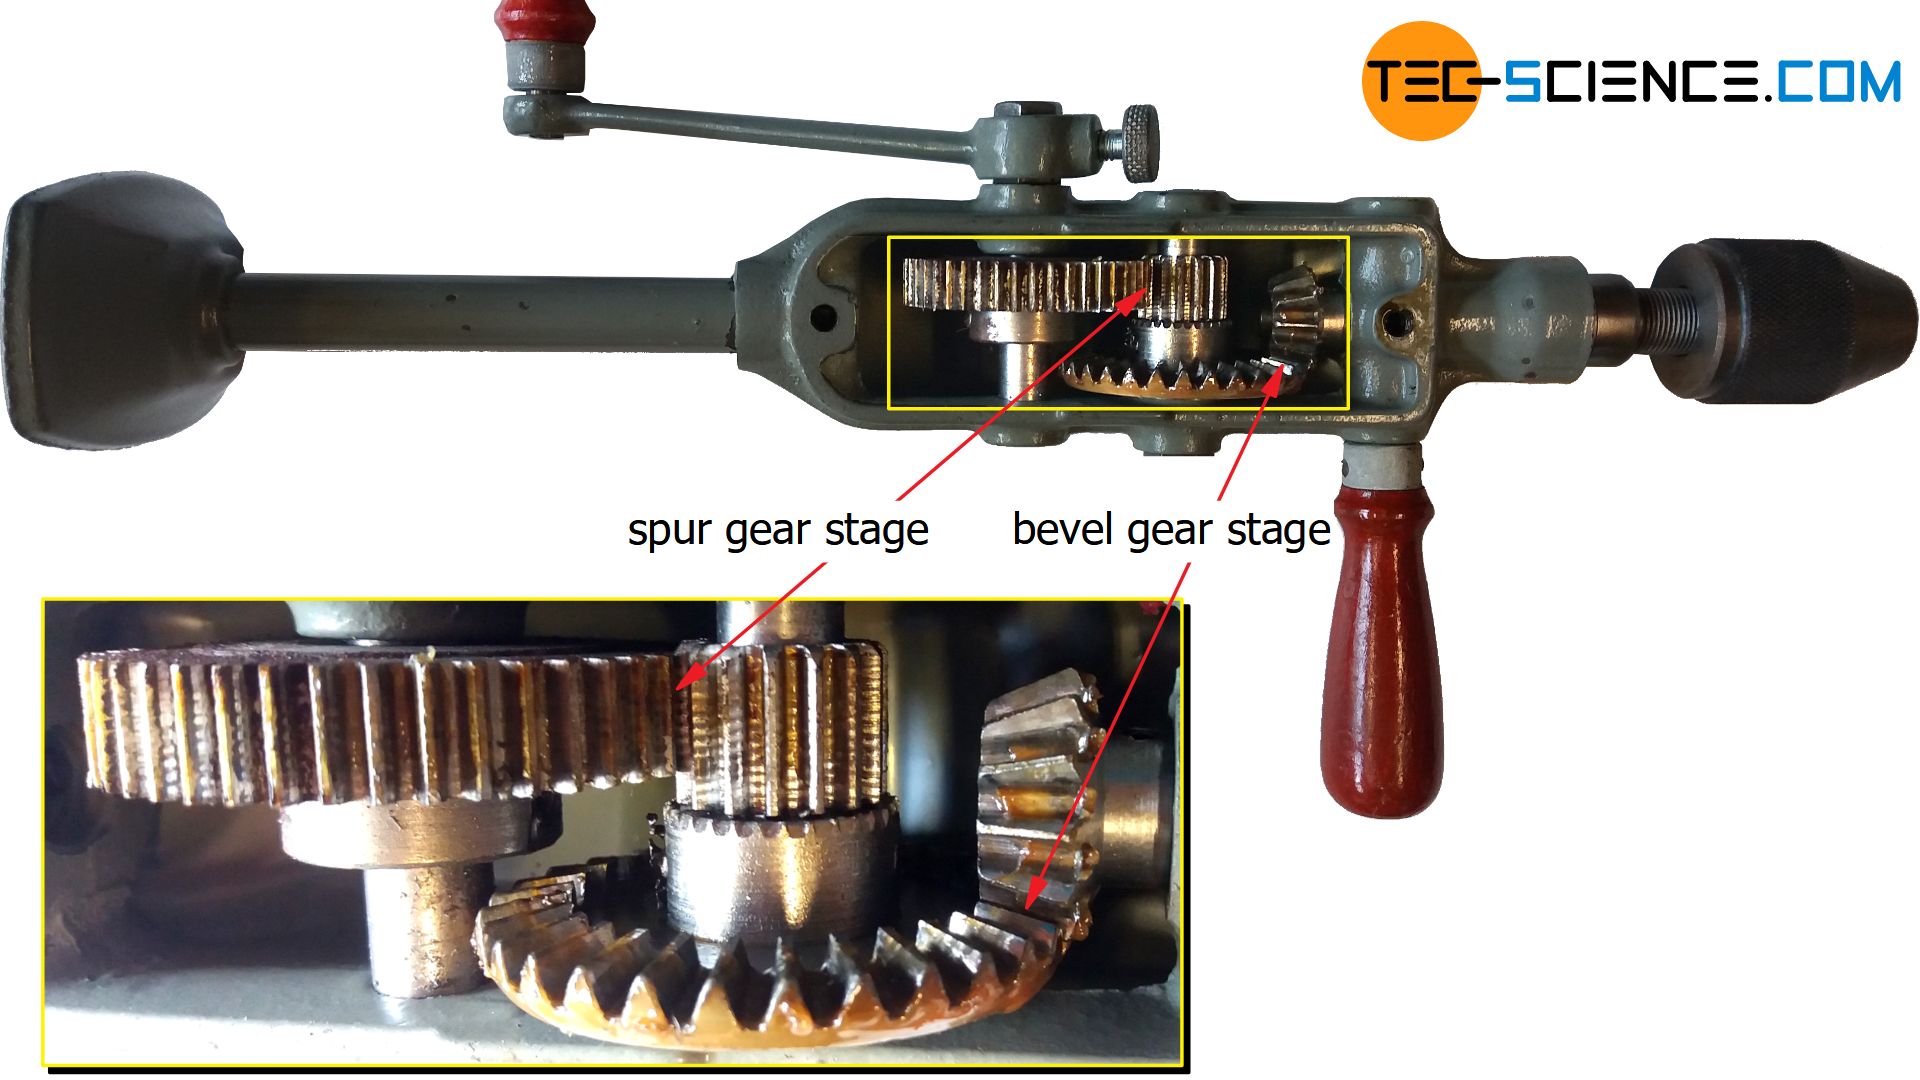 Bevel gear stage of a hand drill